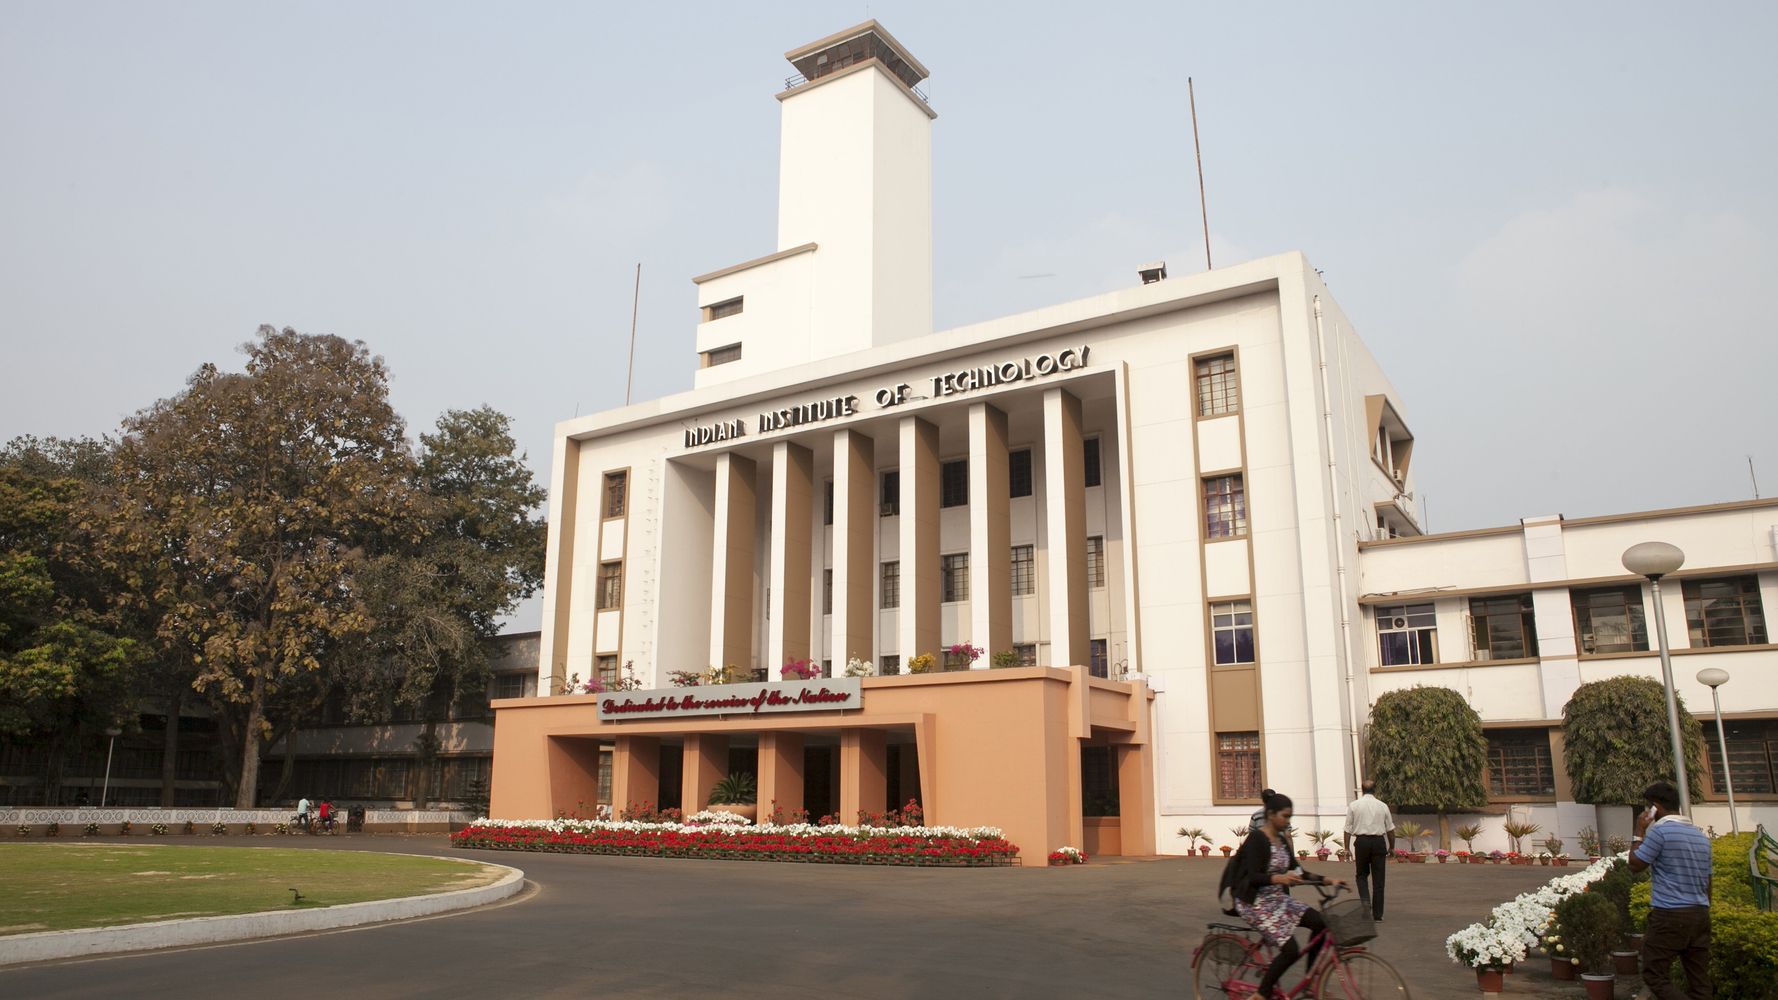 Now IIT Kharagpur Architecture Students Will Be Taught 'Vastu Shastra' |<img data-img-src='https://img.huffingtonpost.com/asset/5c11eea02600005e0484c4b4.jpeg?ops=1778_1000' alt=' Which IIT institute will start Vastu Shastra classes for architecture students' /><p> </p><p><strong>IITs (Indian Foundations of Innovation)</strong> are recognized for their accentuation of medical and modern-day engineering ideas. The instructional plan for engineering packages in those agencies is typically intended to grant understudies areas of energy for modern compositional practices, which comprise components like supportability, time coordination, and innovative layout.</p><p>While <strong>Vastu Shastra</strong>, an vintage Indian gadget of layout, has old and social significance, its mix into the informative instructional plan of IITs or equivalent institutions may want to likewise rely upon numerous elements, which include informative approaches of wondering, instructive attributes, and the overall cognizance of the engineering packages.</p><p>To get the best proper and current realities concerning a particular IIT<strong></strong>supplying <strong>'Vastu Shastra'</strong> hints for layout understudies, it's miles urged to straightforwardly take a look at the real website of the complex IIT or touch the educational professionals of the character affiliation.</p><p> </p><p>Read more: <a href=